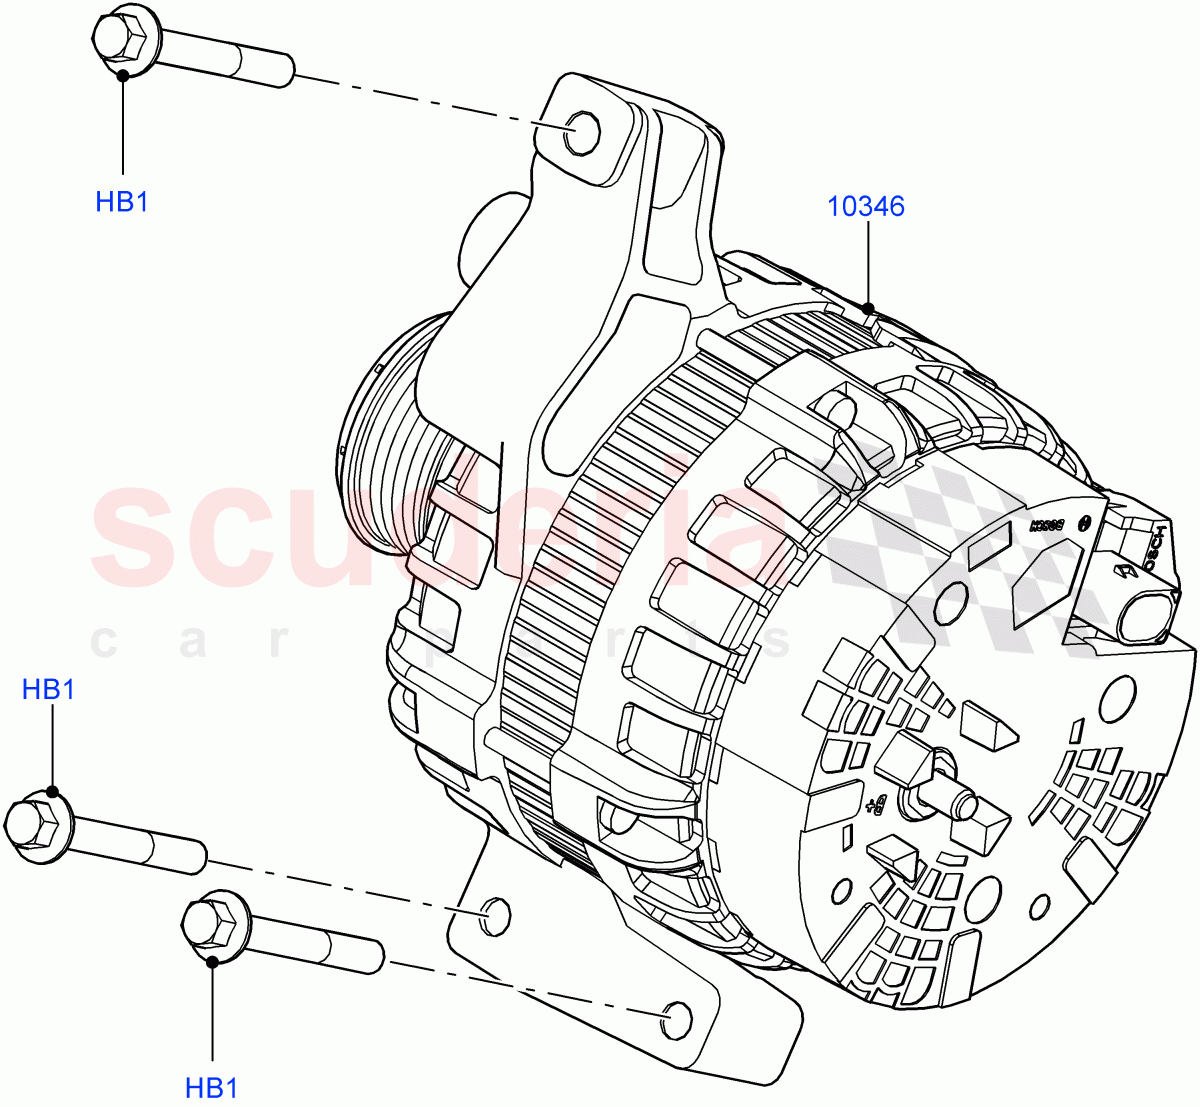 Alternator And Mountings(2.0L 16V TIVCT T/C Gen2 Petrol,Halewood (UK),2.0L 16V TIVCT T/C 240PS Petrol) of Land Rover Land Rover Discovery Sport (2015+) [2.0 Turbo Petrol AJ200P]